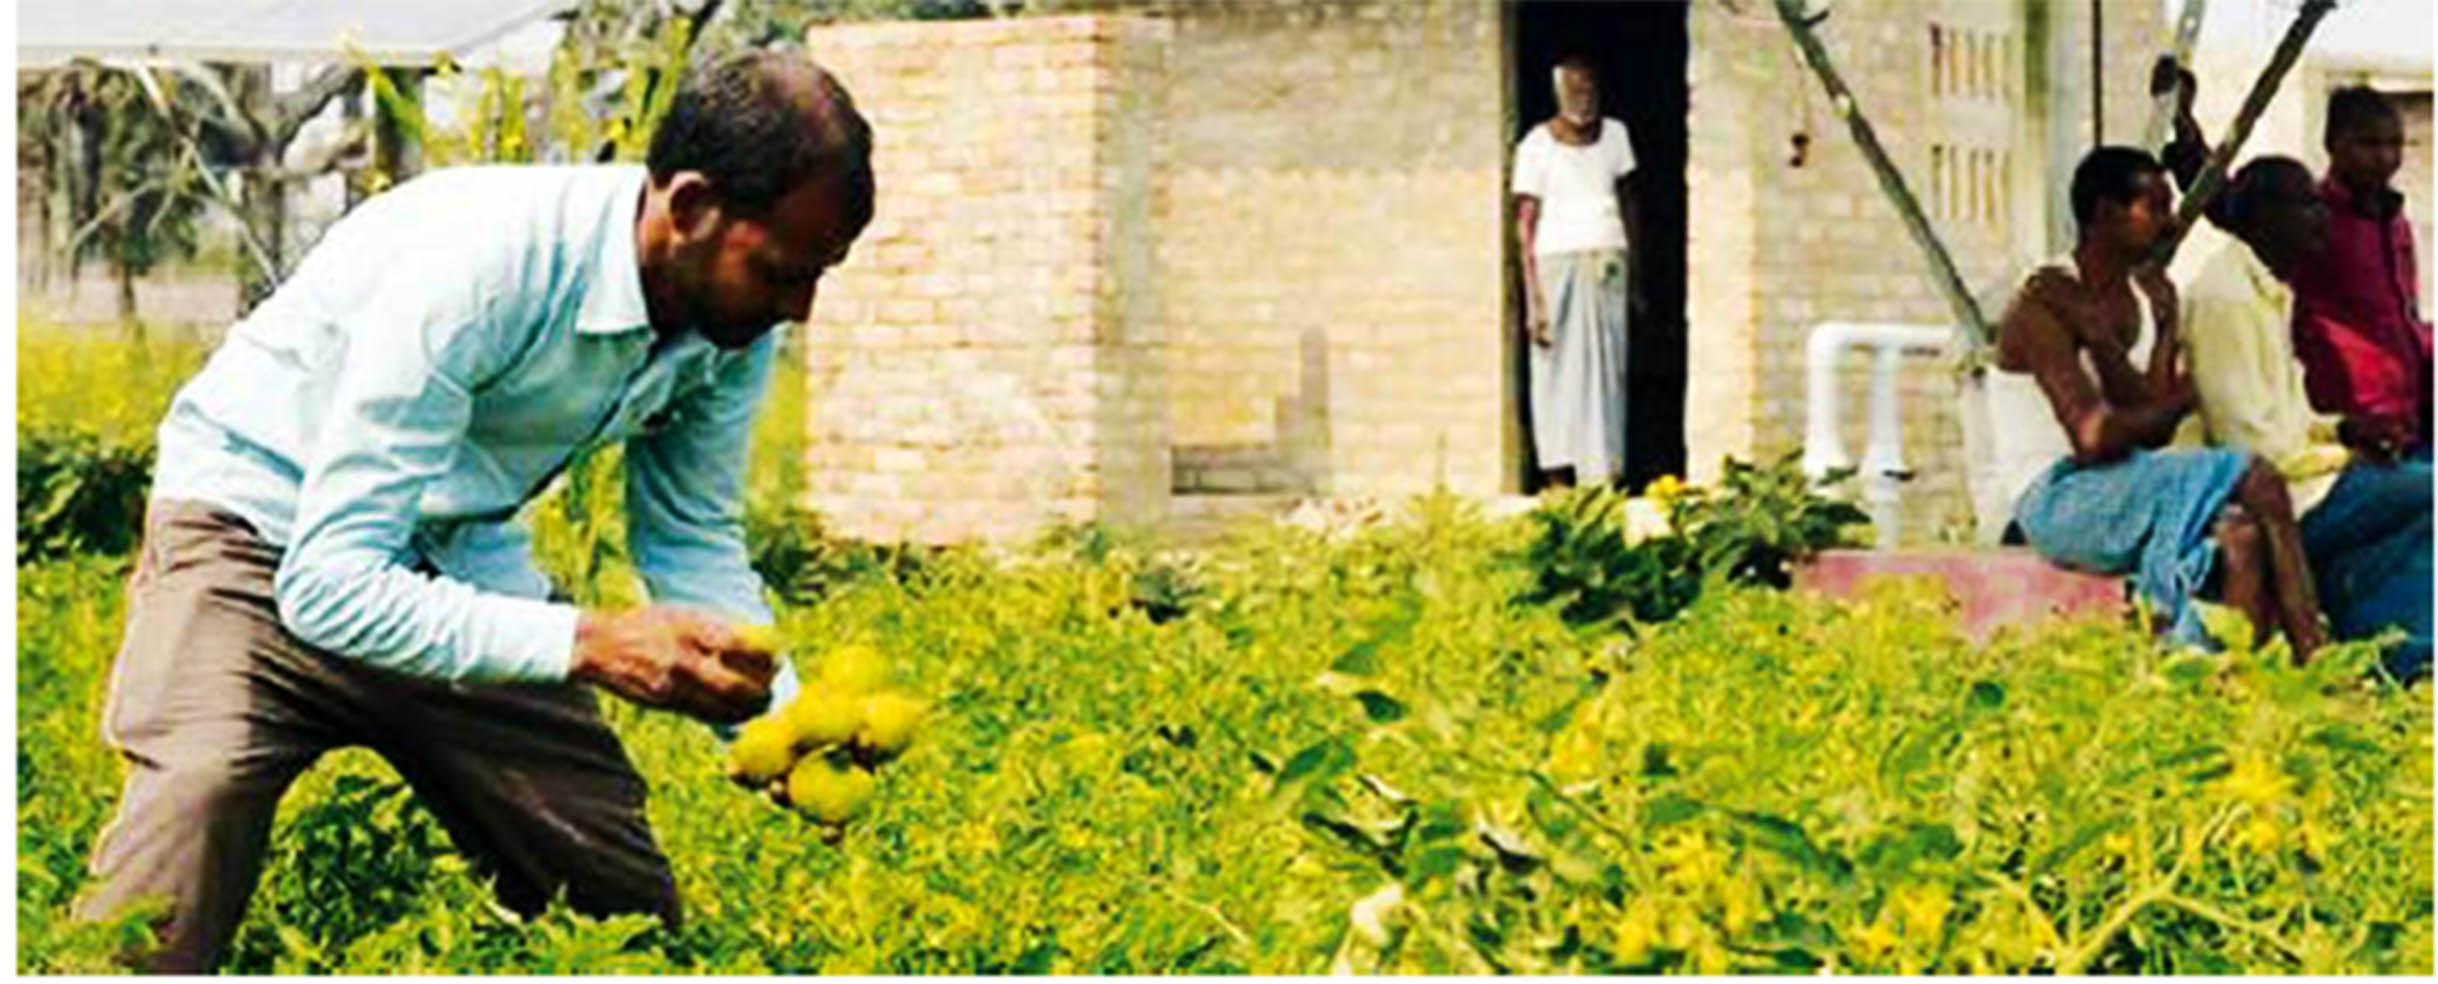 The average returns for vegetable cultivation in Chak Haji turns out to be Rs 79,179 per ha for one crop. (Image: AKRSP)